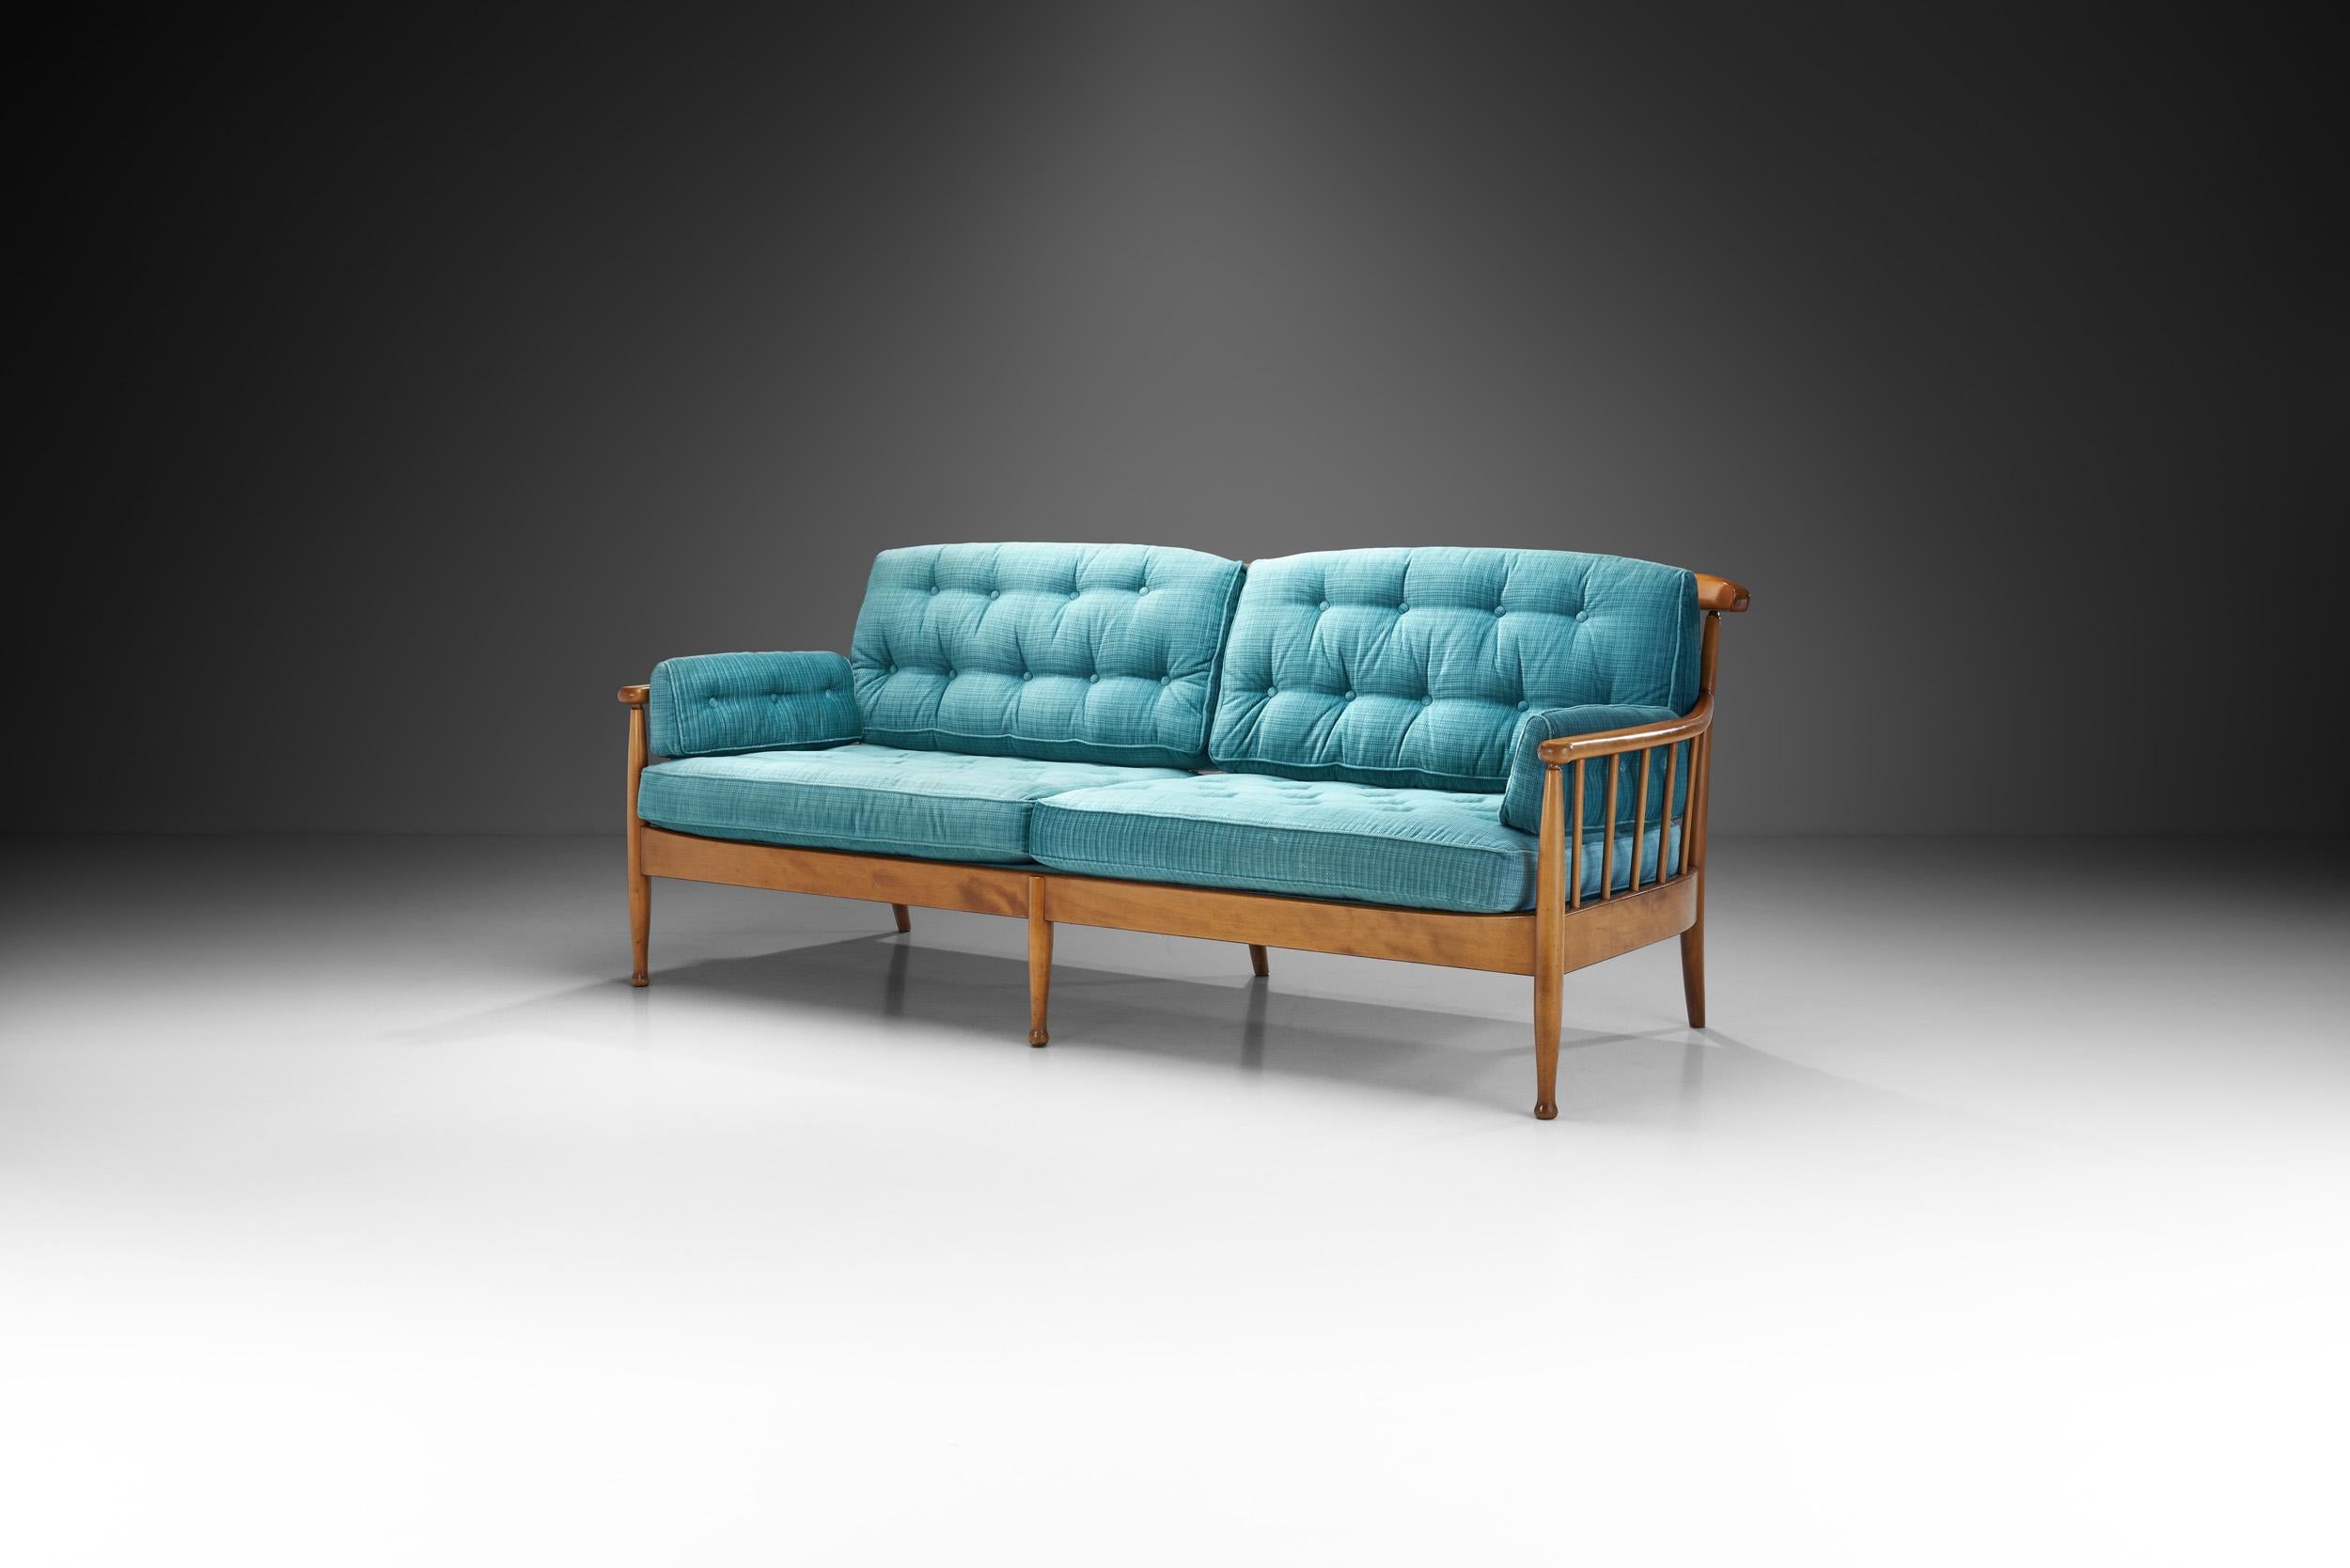 The “Skrindan” sofa model was designed in 1967 by iconic Swedish designer, Kerstin Hörlin-Homquist. Hörlin-Holmquist had a unique and humanistic design vision, and thanks to her uncompromising attitude, she created some of the most famous Swedish